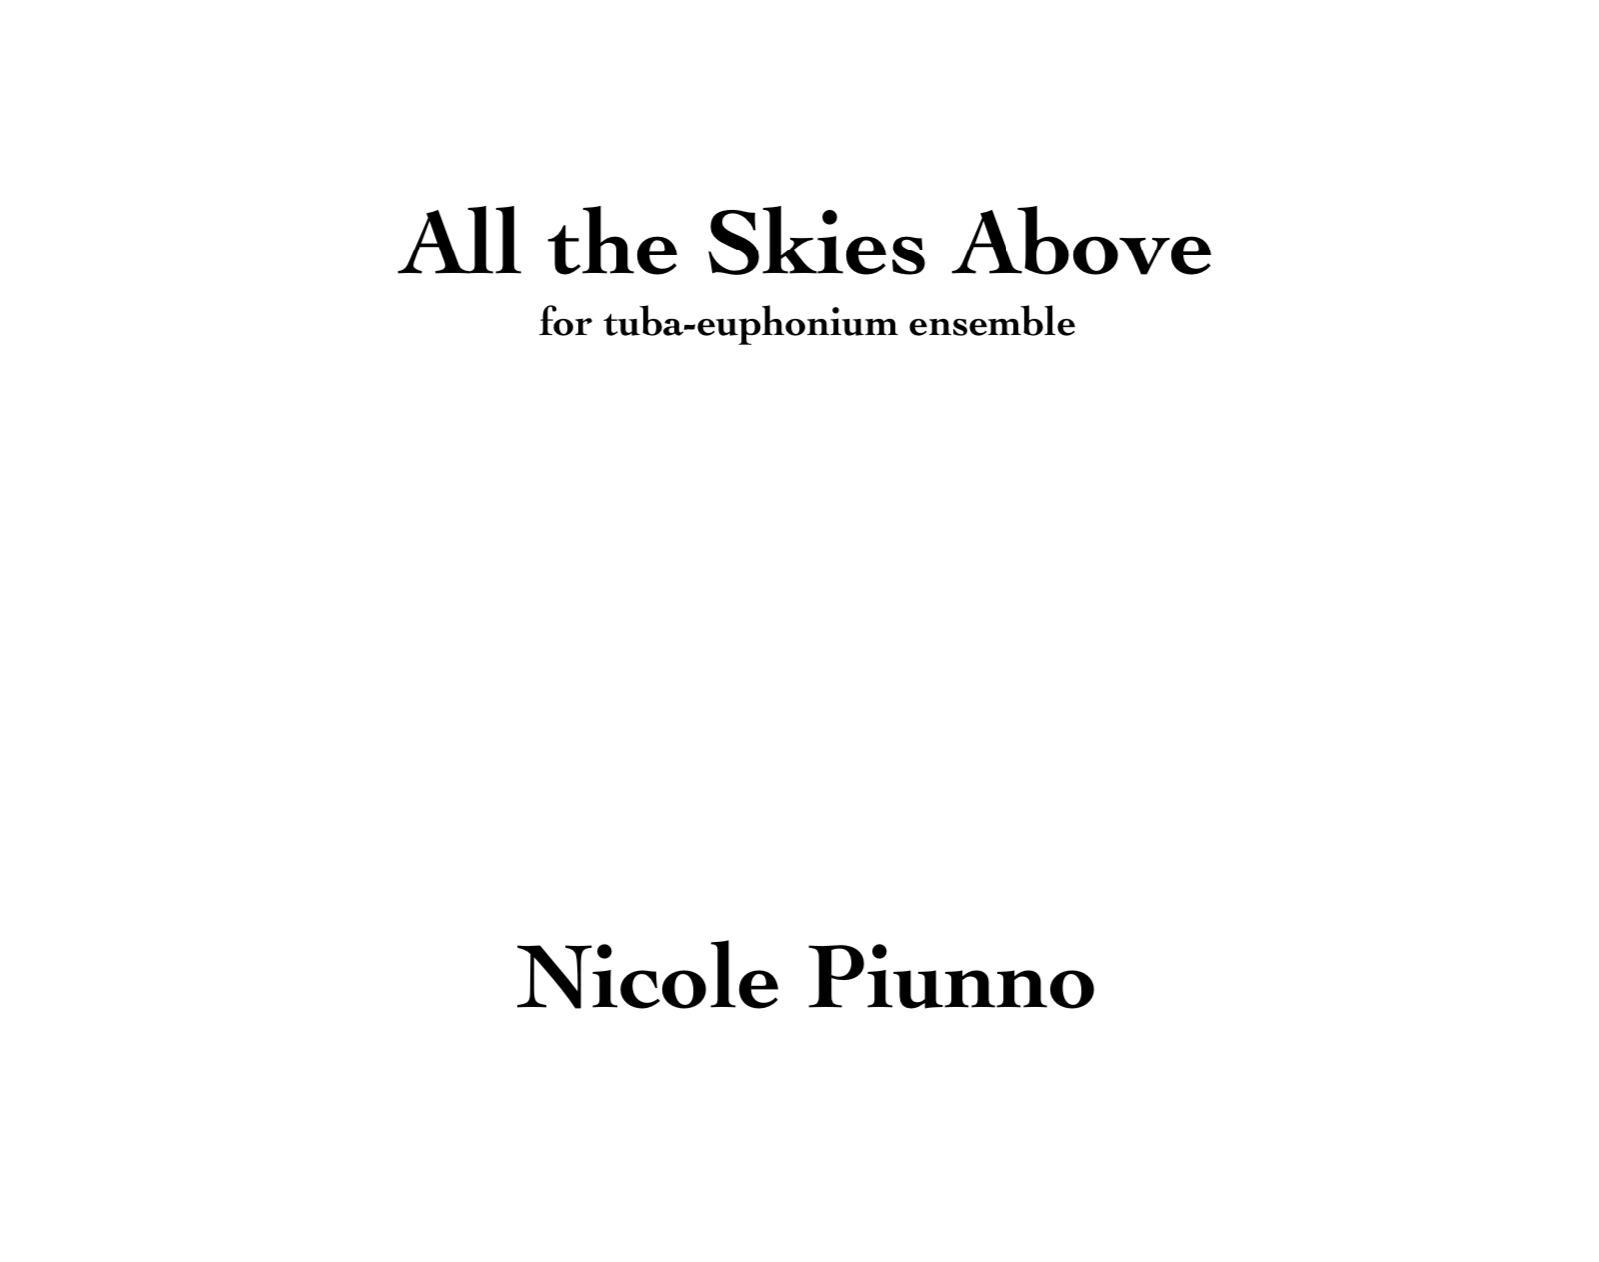 All The Skies Above (Tuba/Euph Version) by Nicole Piunno